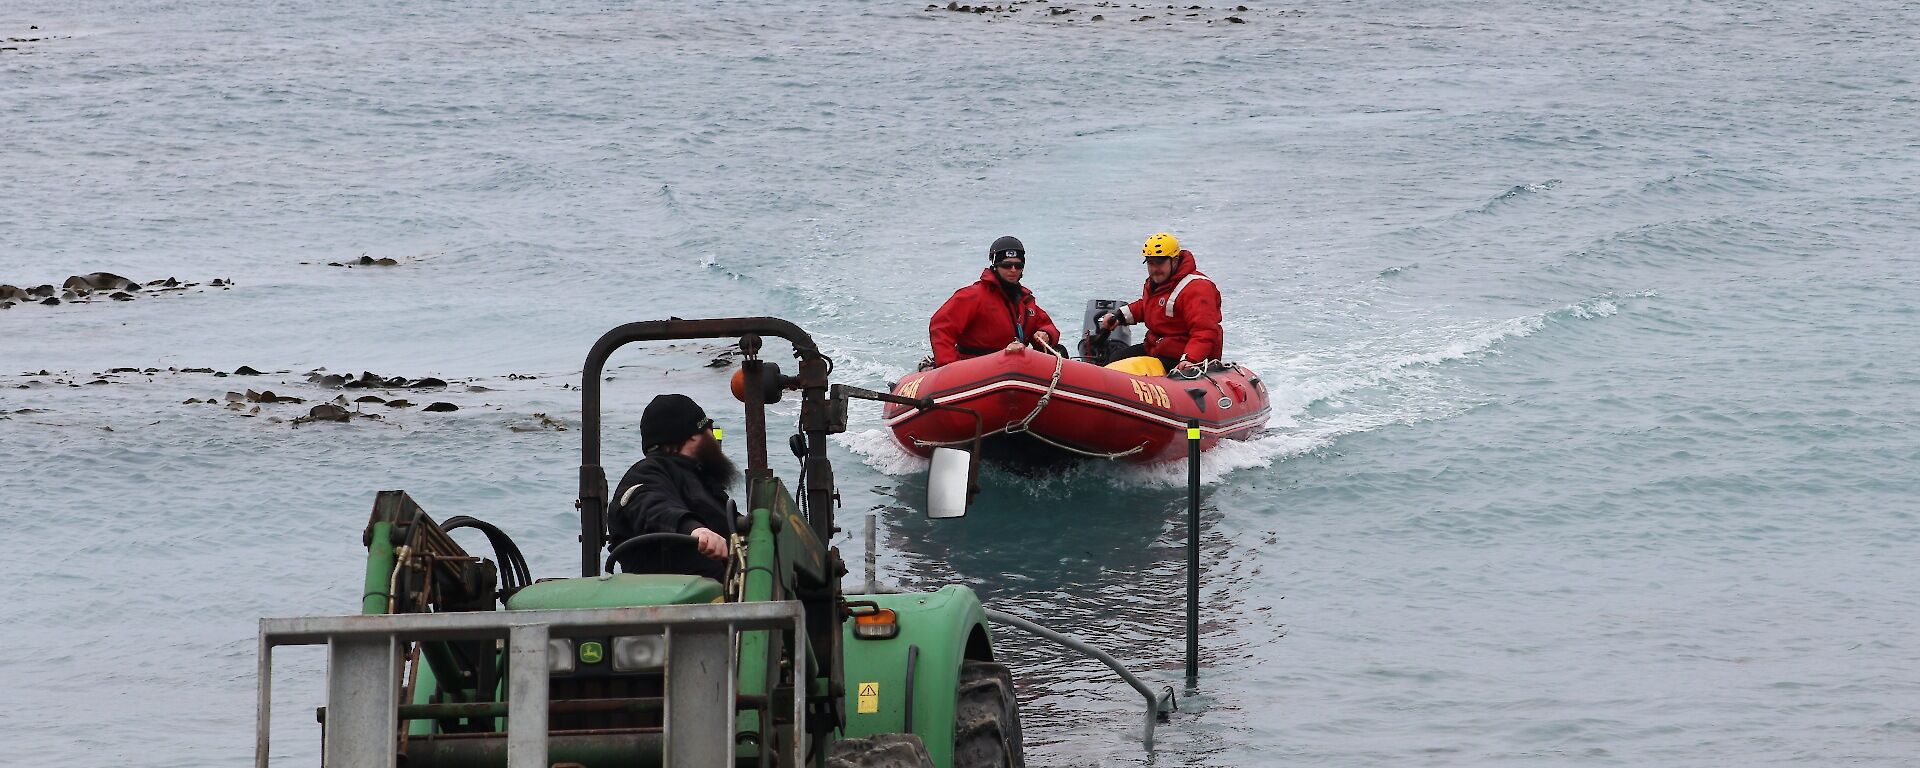 People in a red rubber boat being pulled up the beach by a green tractor